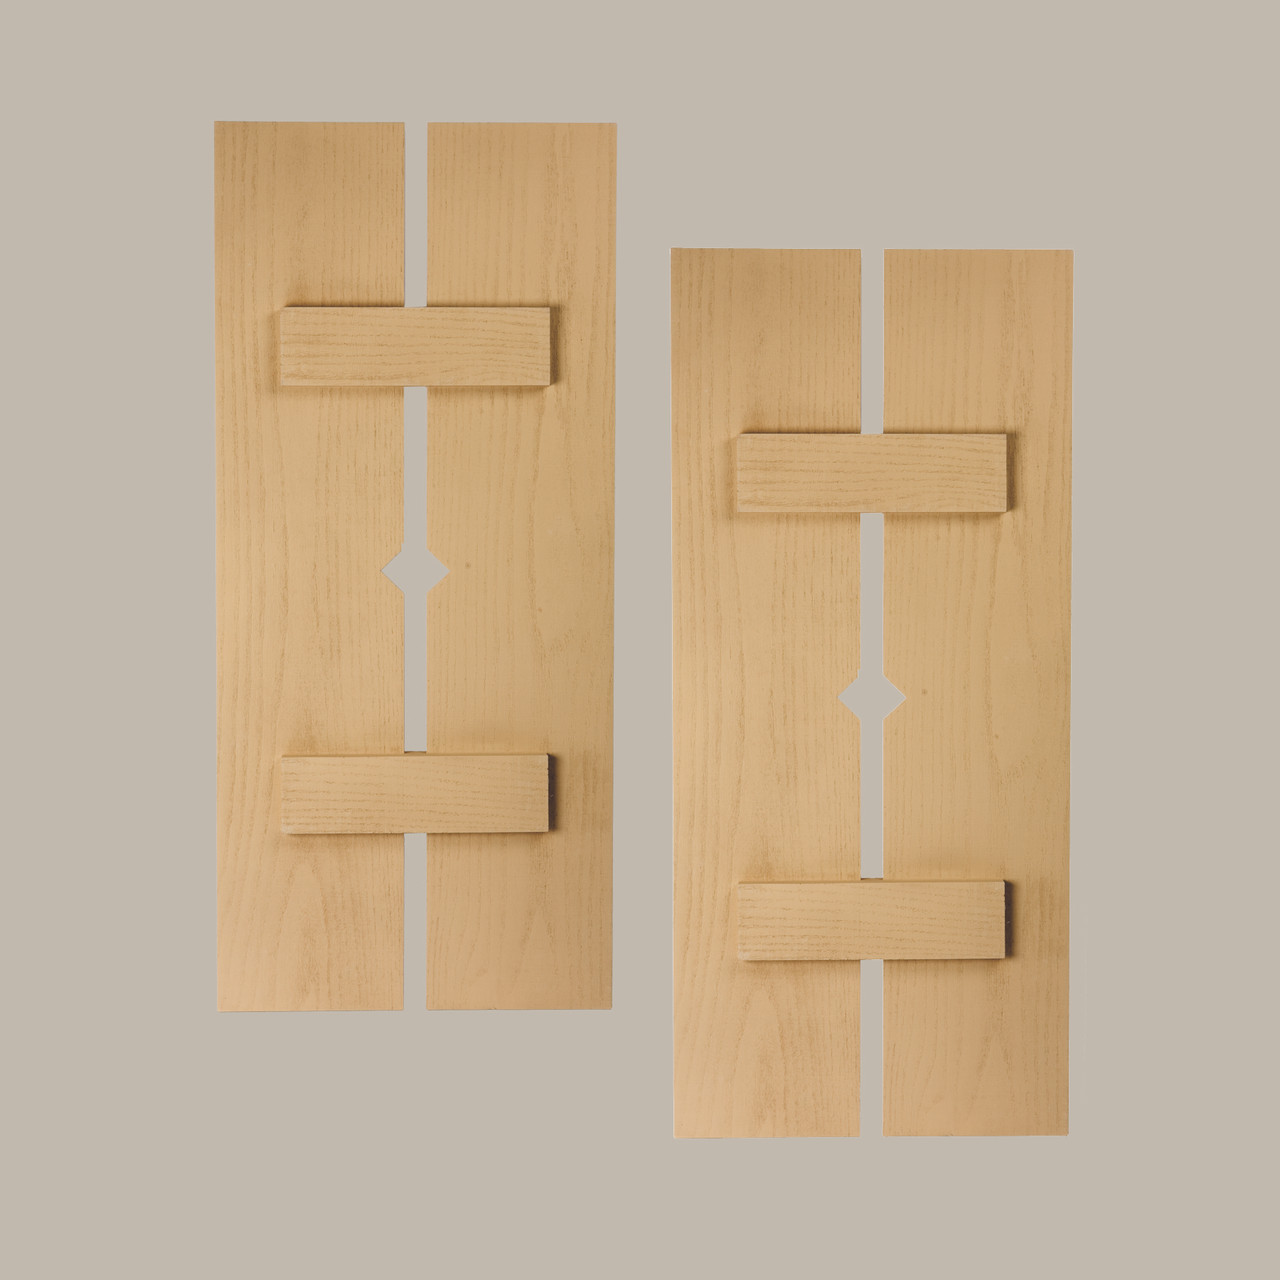 12 inch by 39 inch Plank Shutter with 2-Plank, Diamond